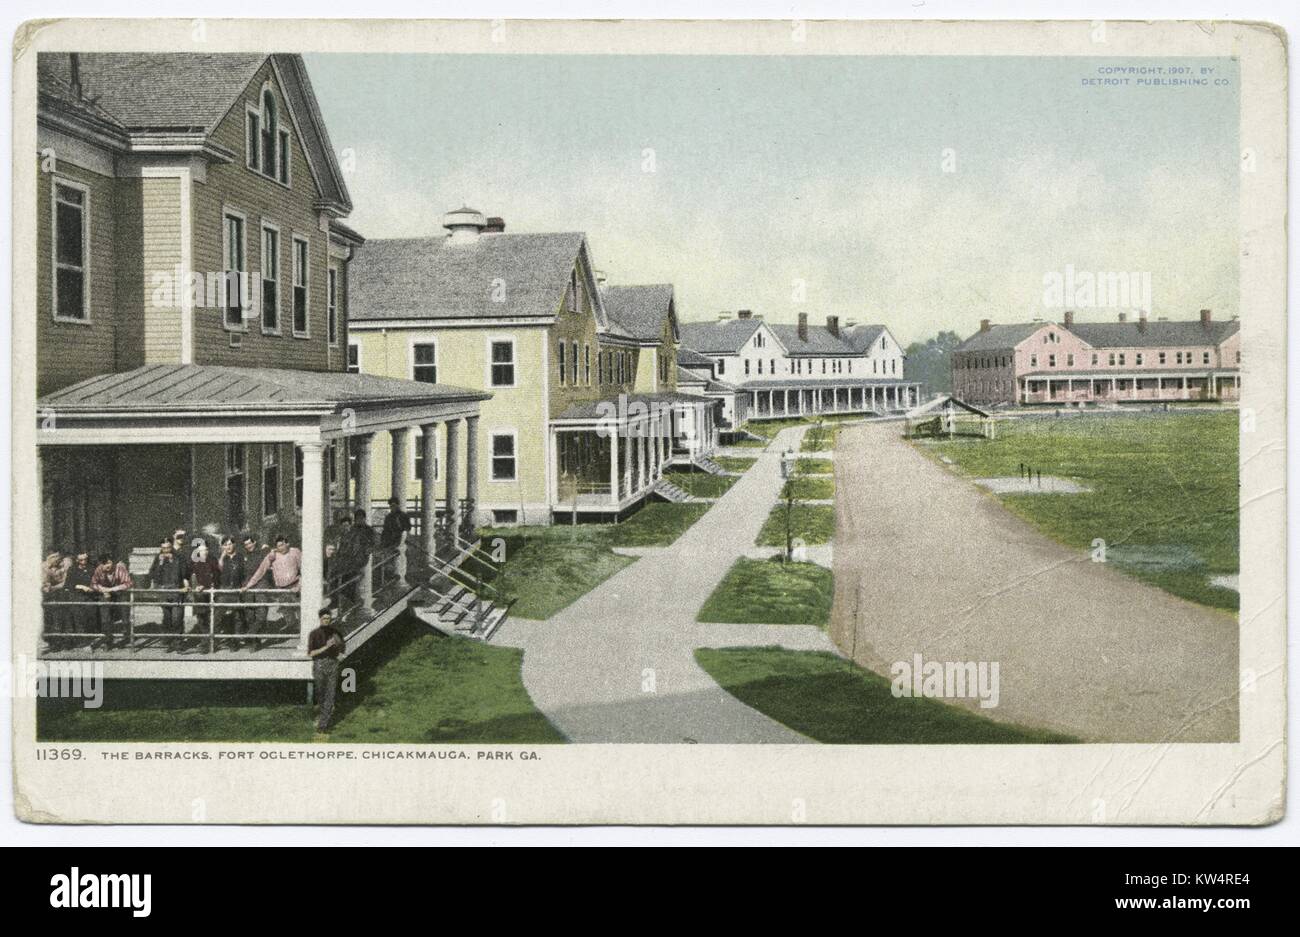 Road lined with barracks, Fort Oglethorpe, Chickamauga, Georgia, USA, 1907. From the New York Public Library. () Stock Photo